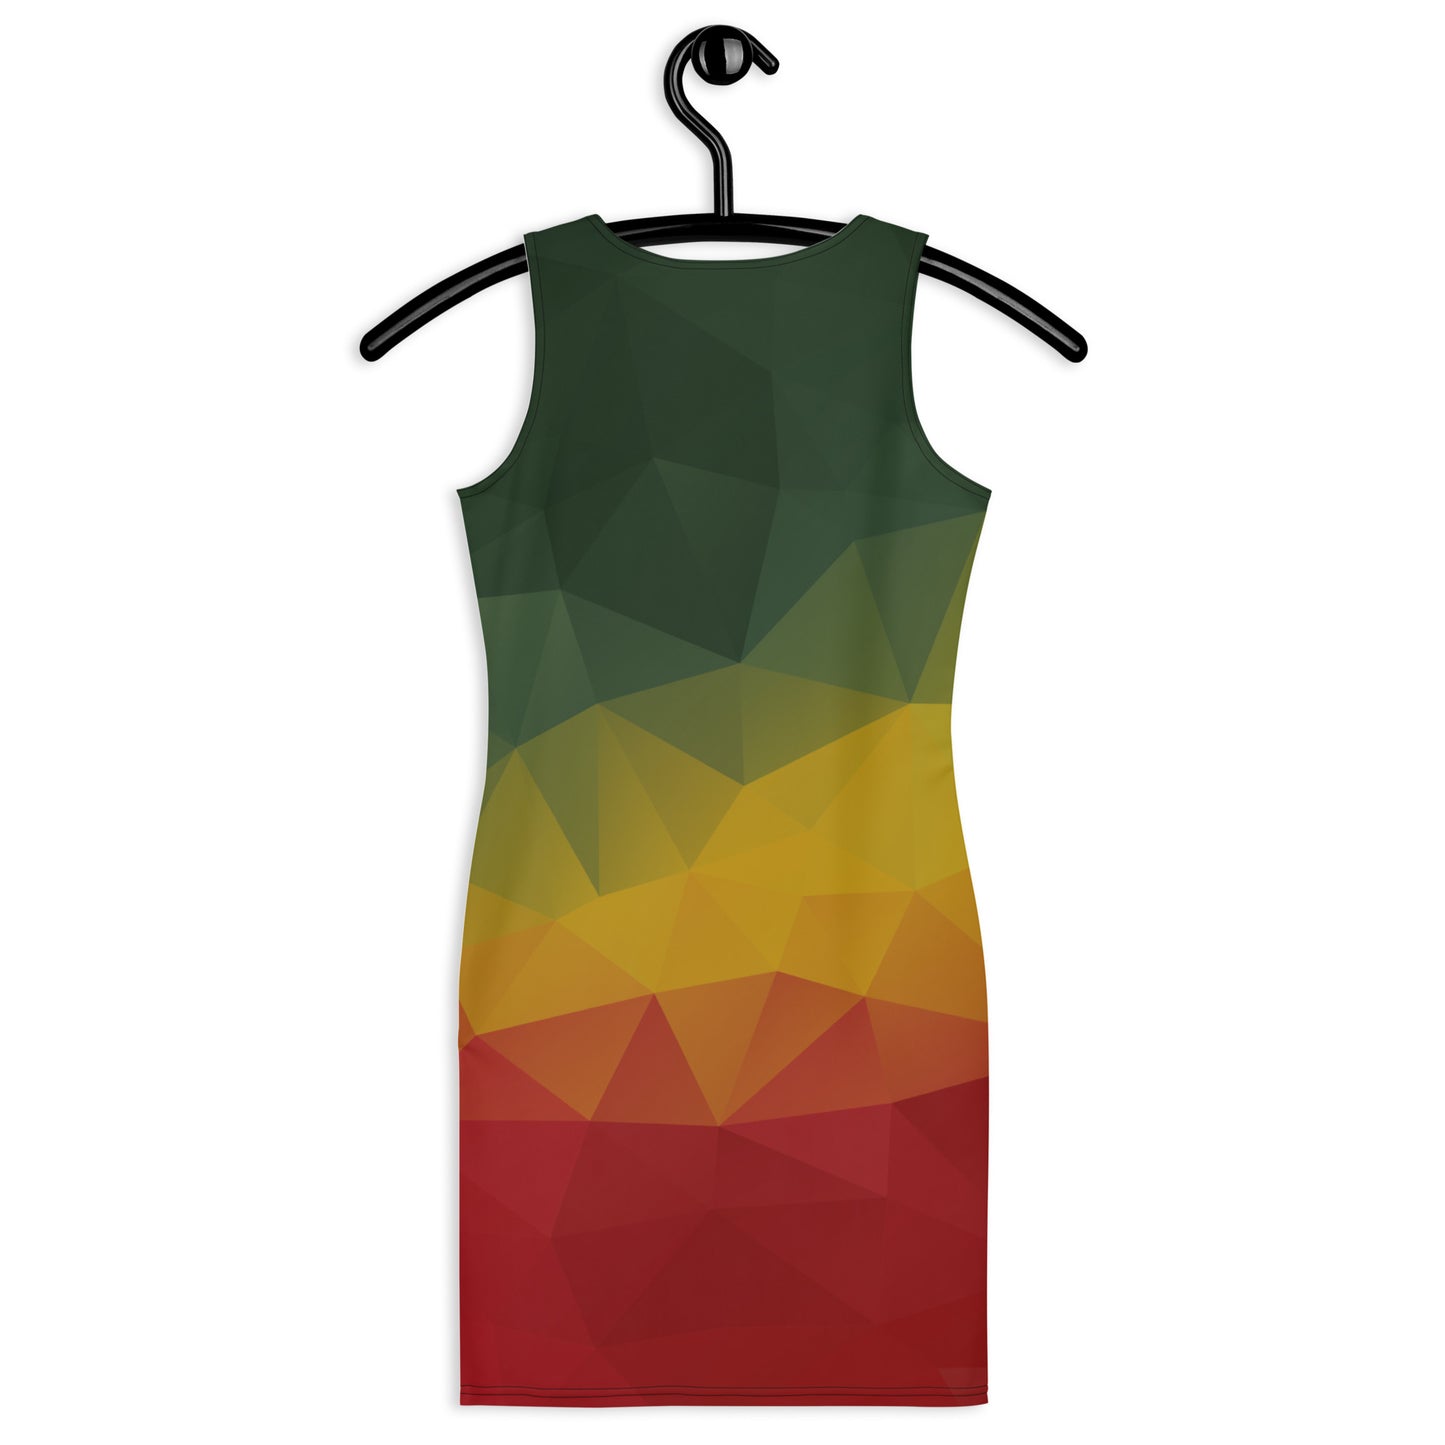 Ethiopia Fitted Dress